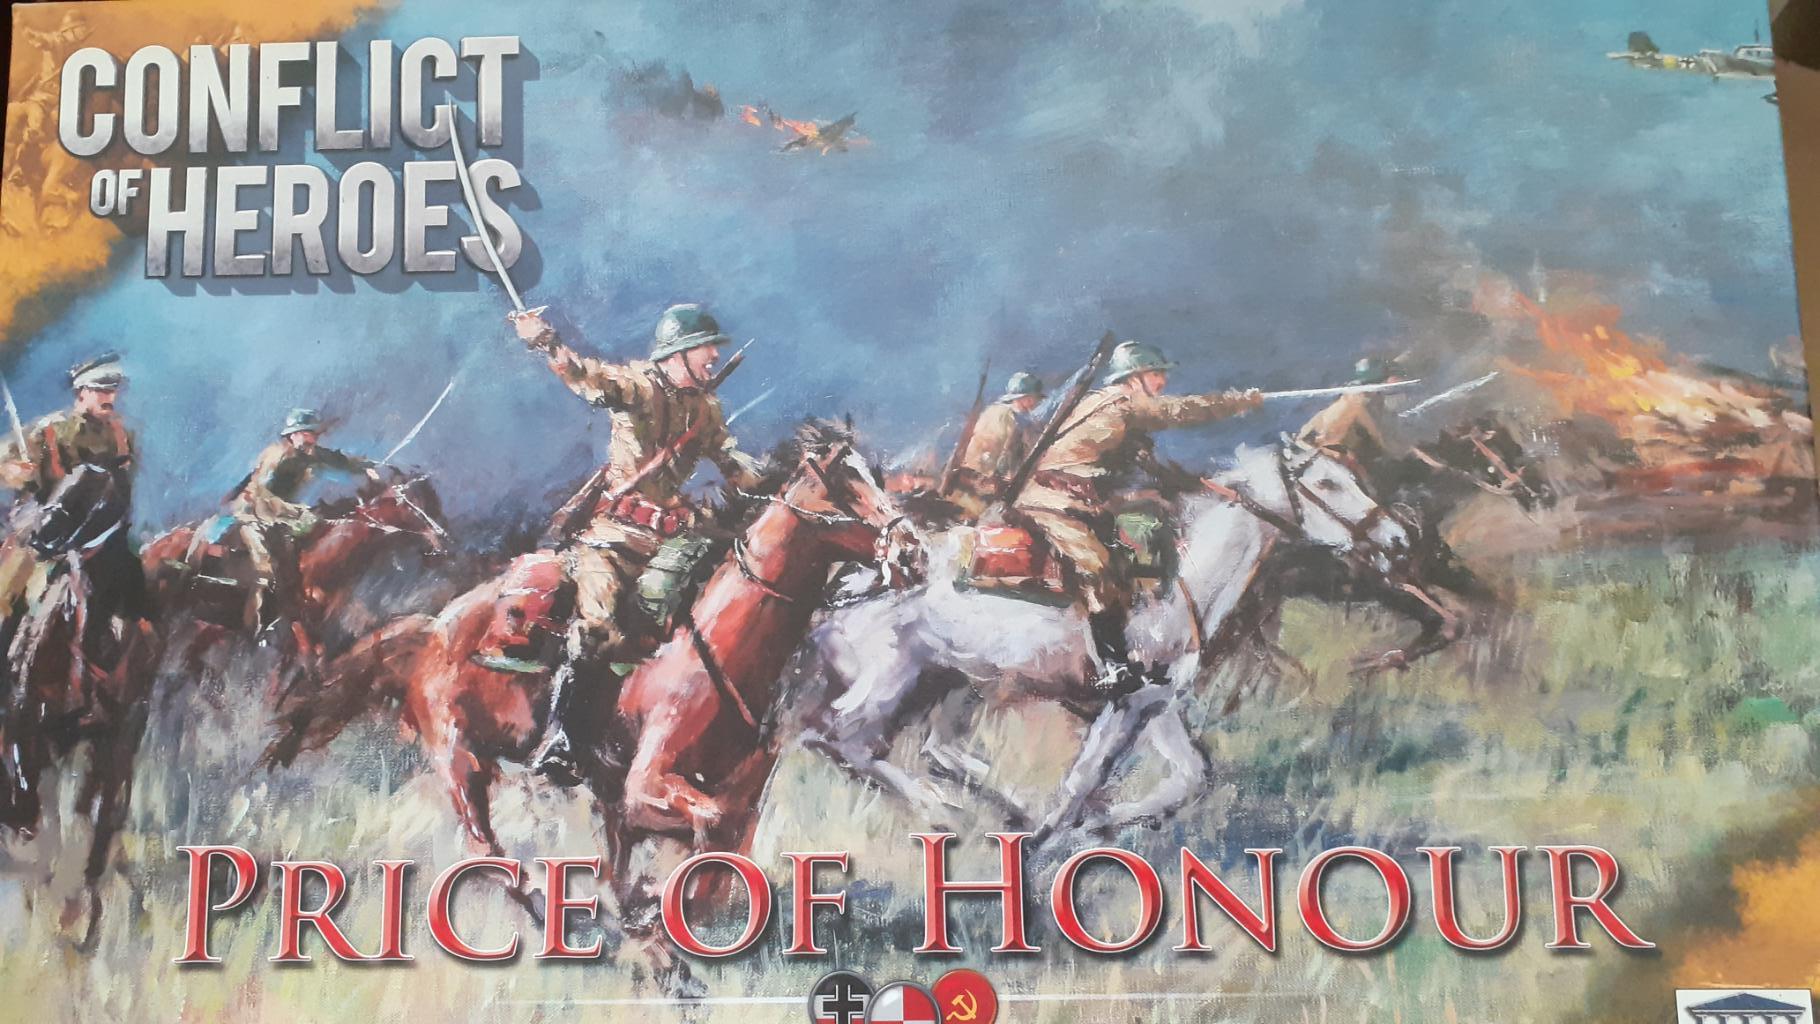 Conflict Of Heroes - Price Of Honour - Poland 1939